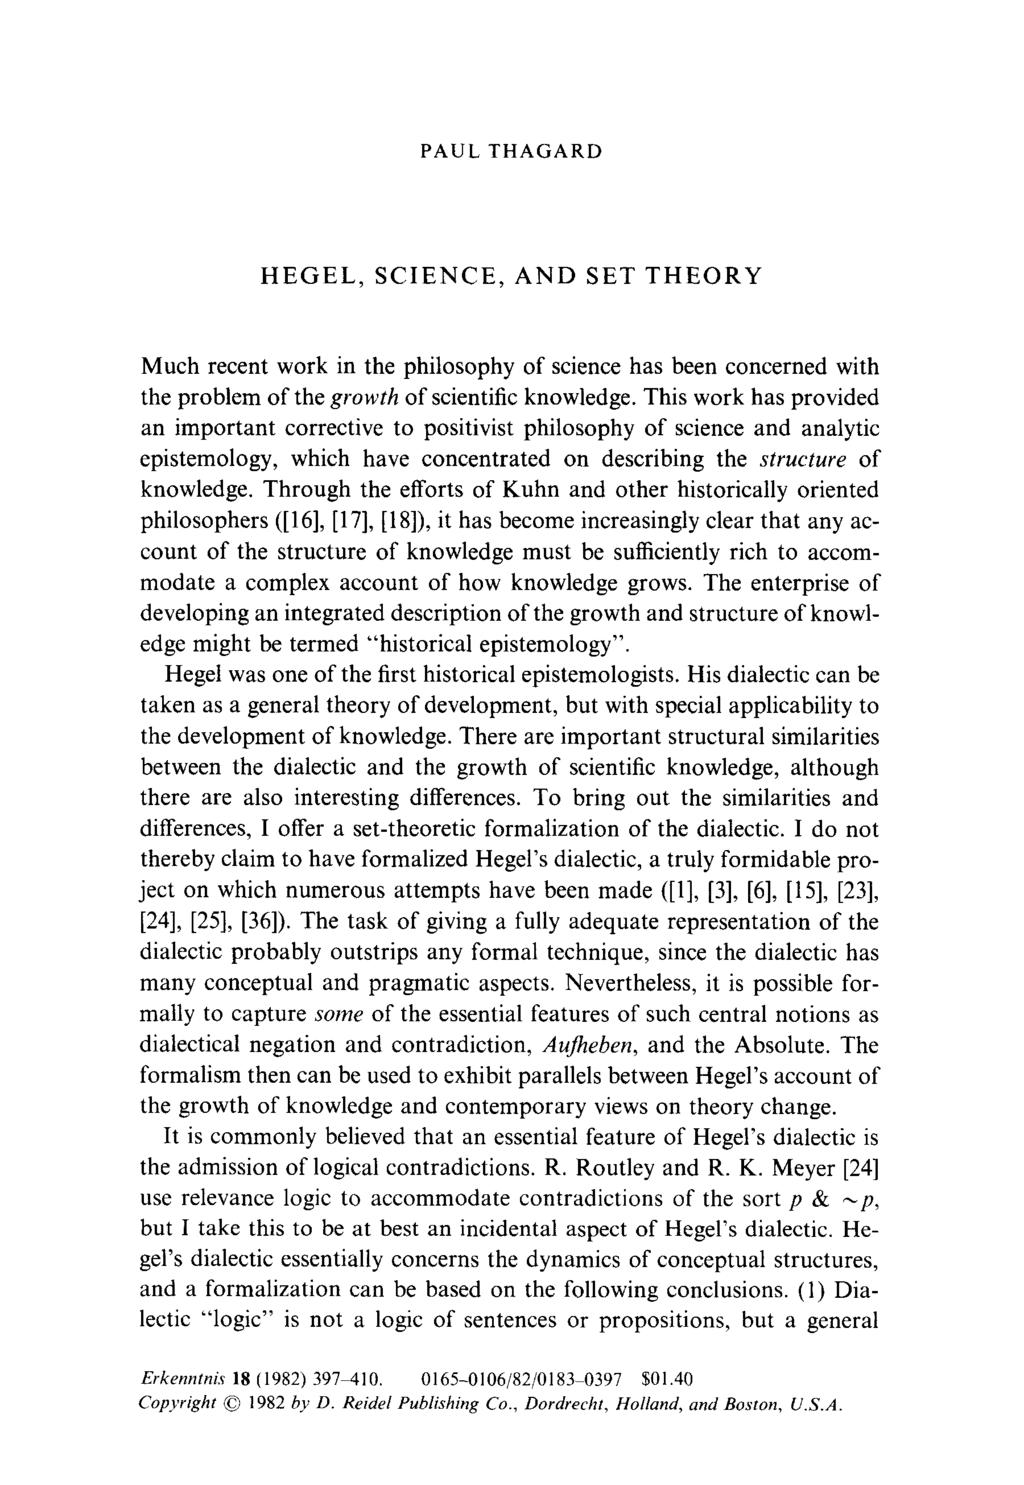 PAULTHAGARD HEGEL, SCIENCE, AND SET THEORY Much recent work in the philosophy of science has been concerned with the problem of the growth of scientific knowledge.